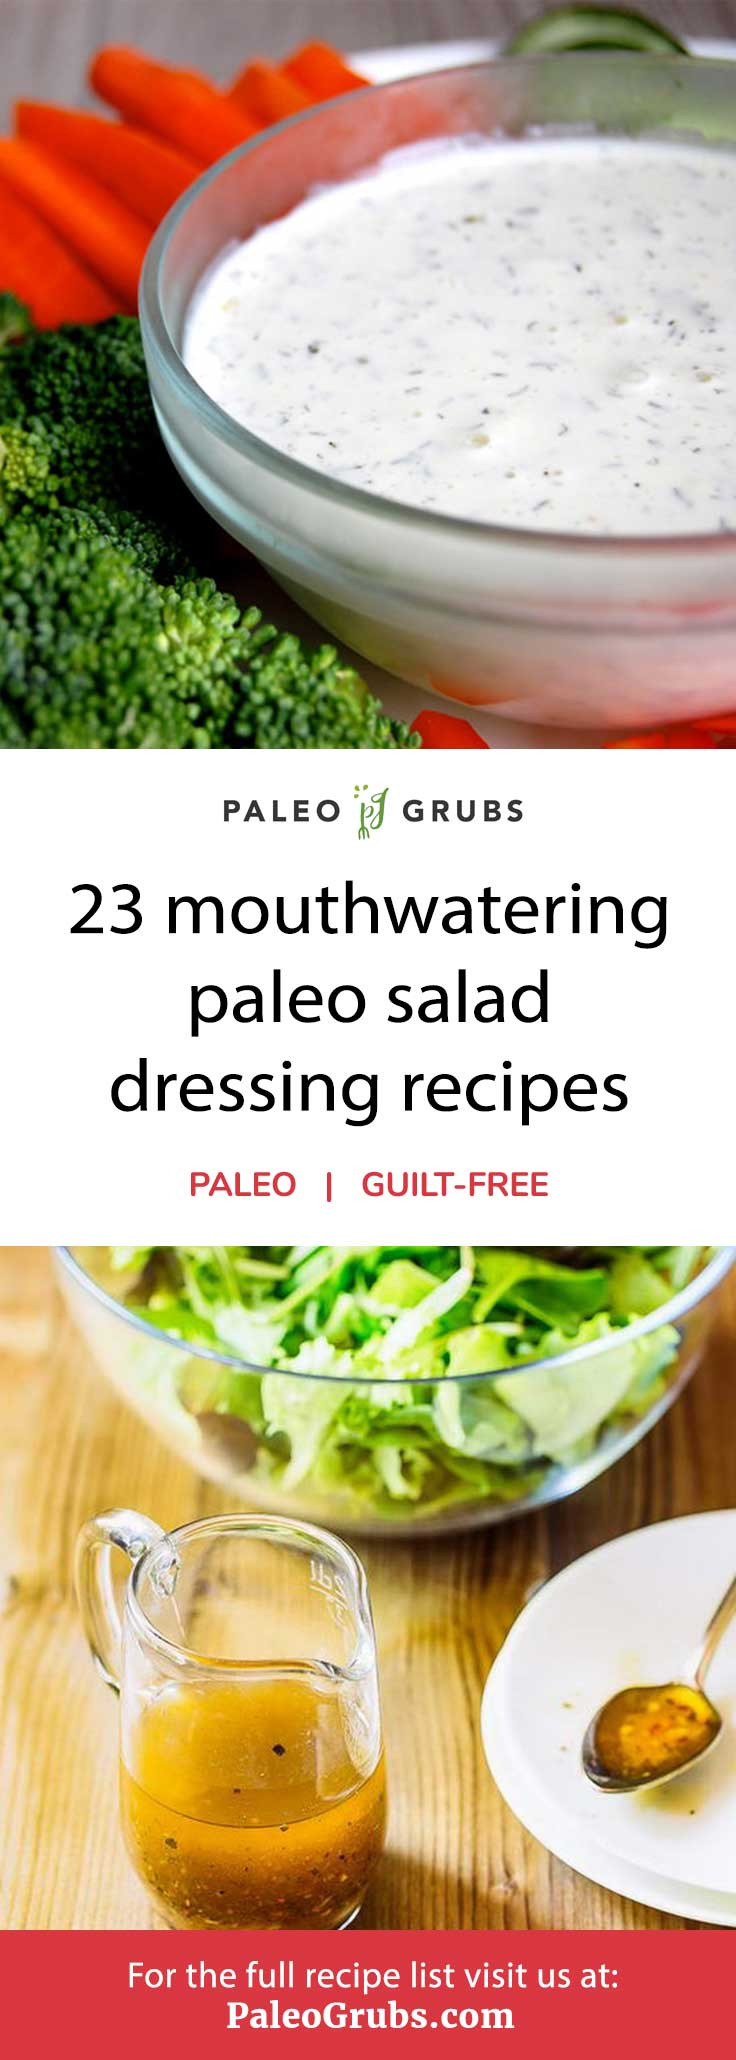 Paleo Salad Dressings Recipes
 23 Mouthwatering Paleo Salad Dressing Recipes Paleo Grubs